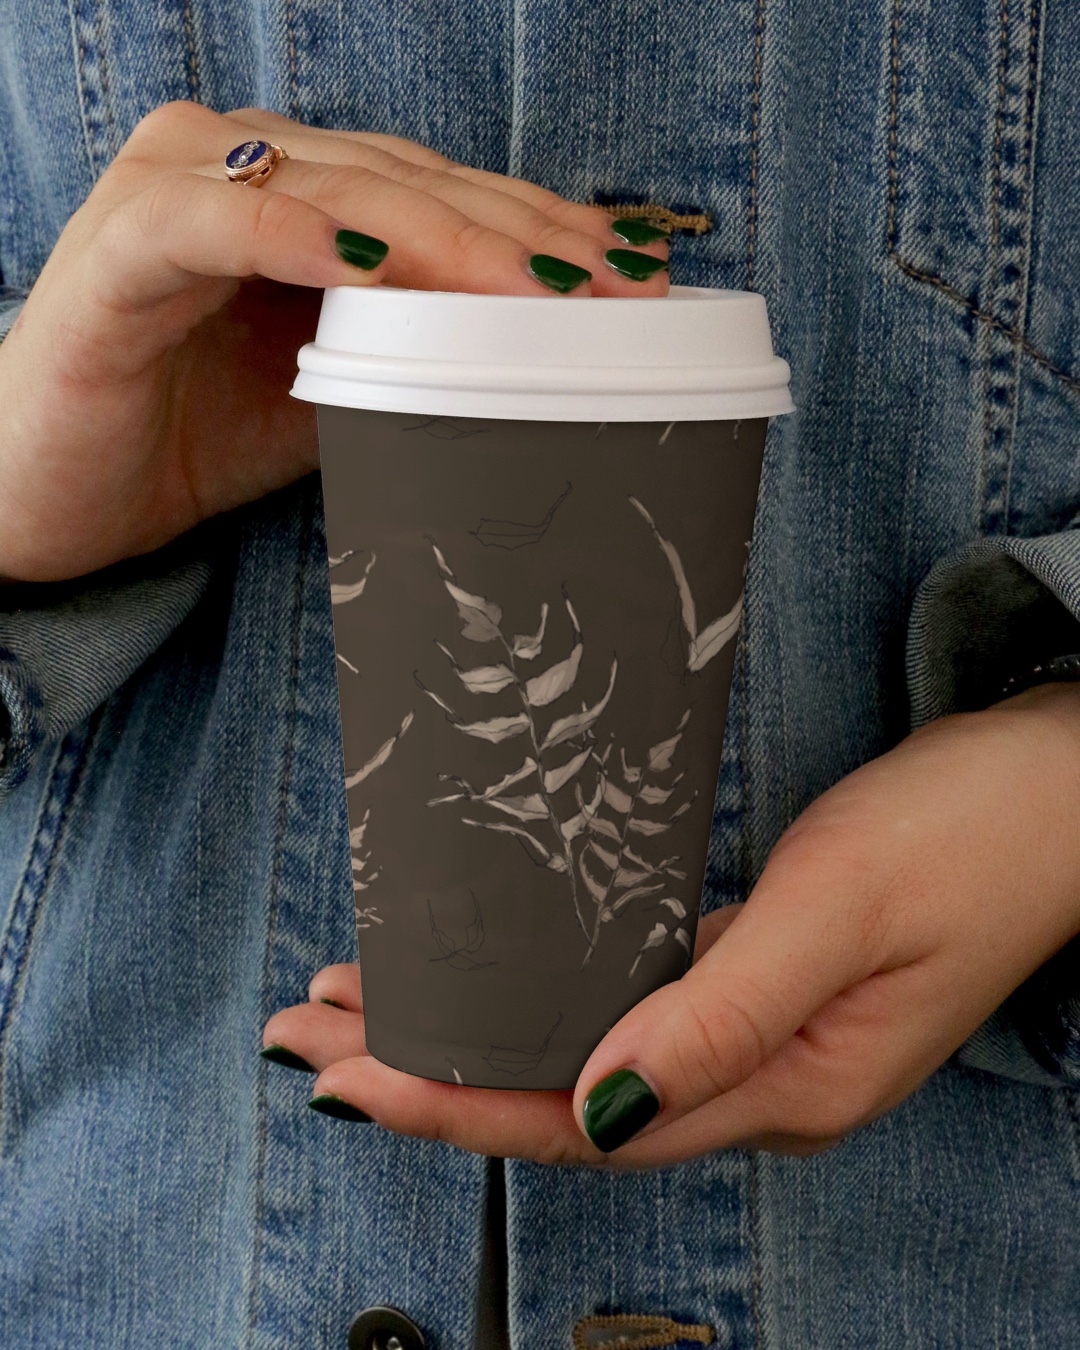 12 Seamless Leaves Patterns, cup design mockup.